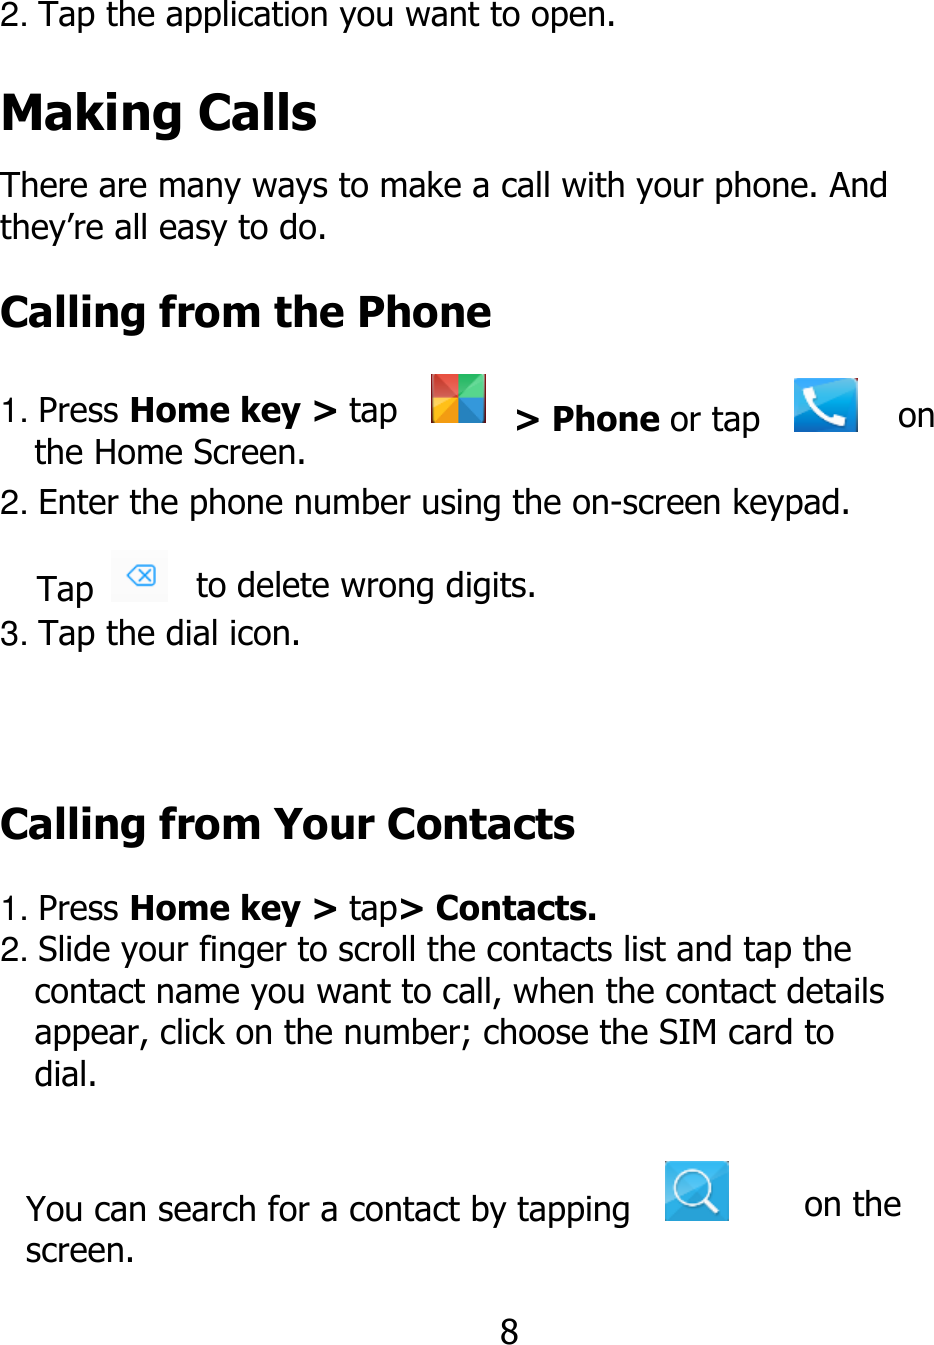 2. Tap the application you want to open. Making Calls There are many ways to make a call with your phone. And they’re all easy to do. Calling from the Phone 1. Press Home key &gt; tap      the Home Screen. Tap   &gt; Phone or tap    on 2. Enter the phone number using the on-screen keypad. to delete wrong digits.  3. Tap the dial icon. Calling from Your Contacts 1. Press Home key &gt; tap&gt; Contacts. 2. Slide your finger to scroll the contacts list and tap the   contact name you want to call, when the contact details   appear, click on the number; choose the SIM card to   dial. You can search for a contact by tapping    screen. 8 on the 